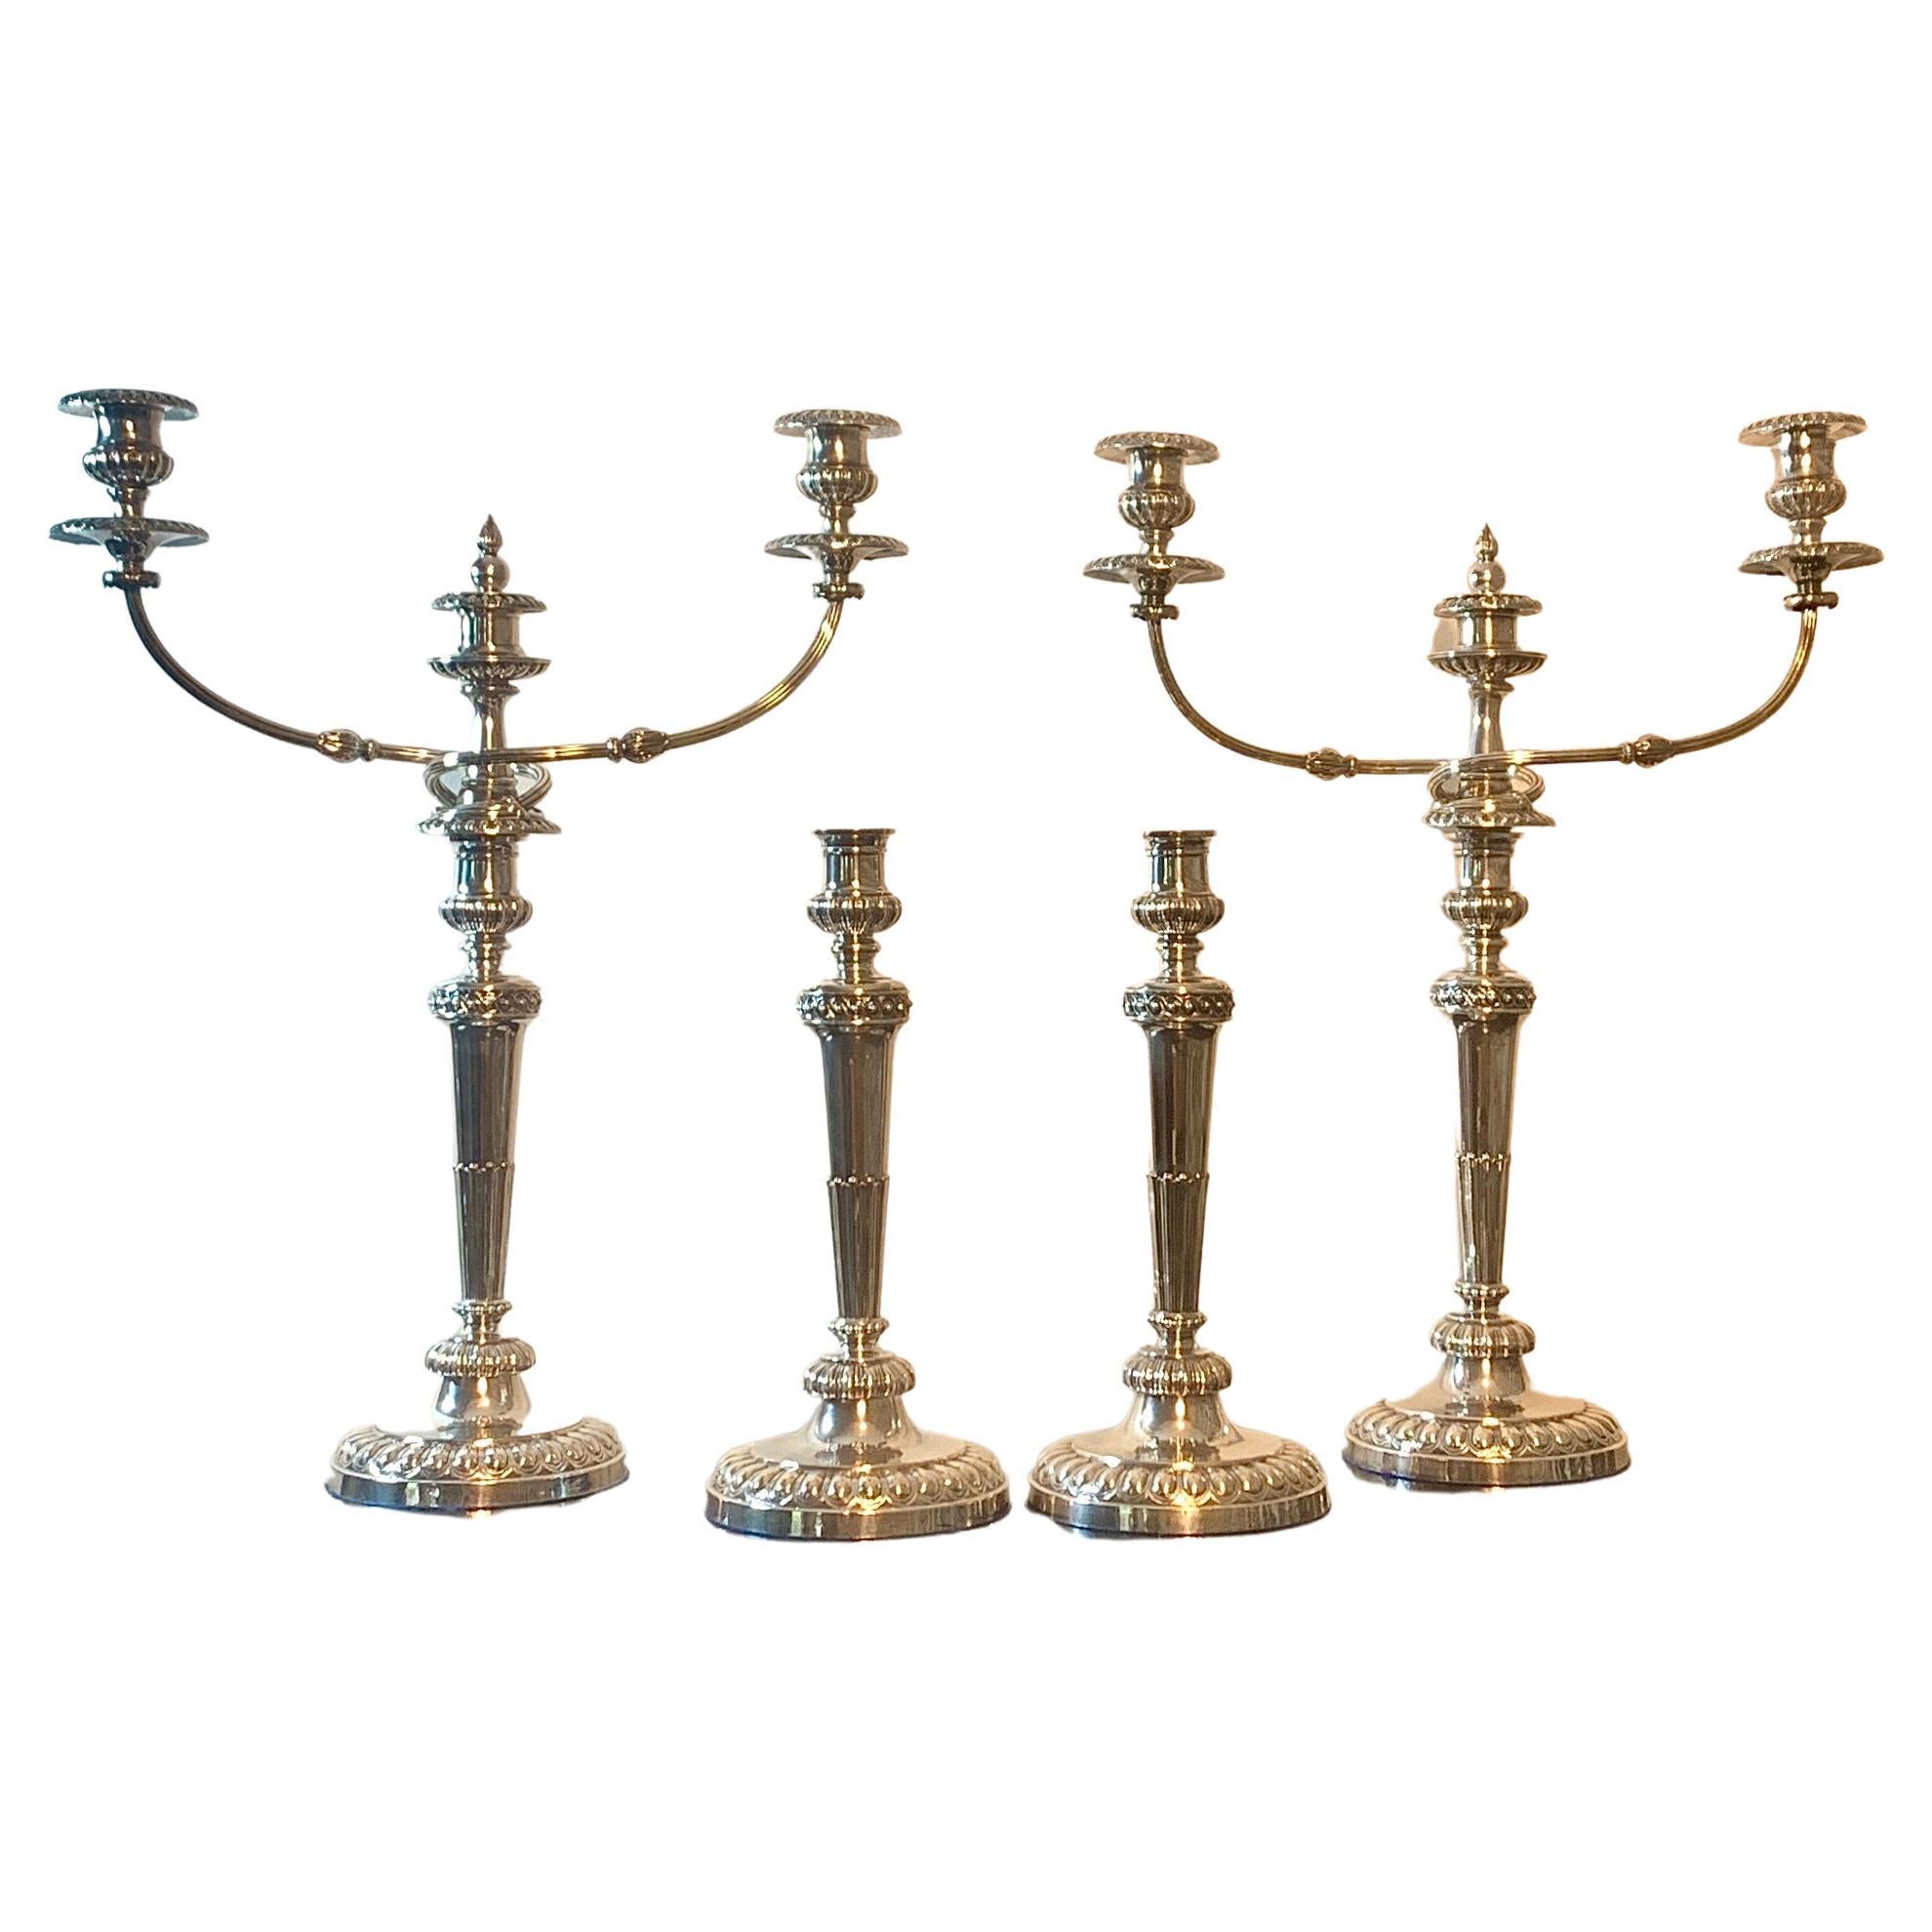 Hard to find suite consisting of 2 Matthew Boulton three-light candelabra & 2 matching candlesticks. This grouping was cared for and kept together for over 50 years by the previous owner in their Beverly Hills estate. 

Candelabra size: 22.5